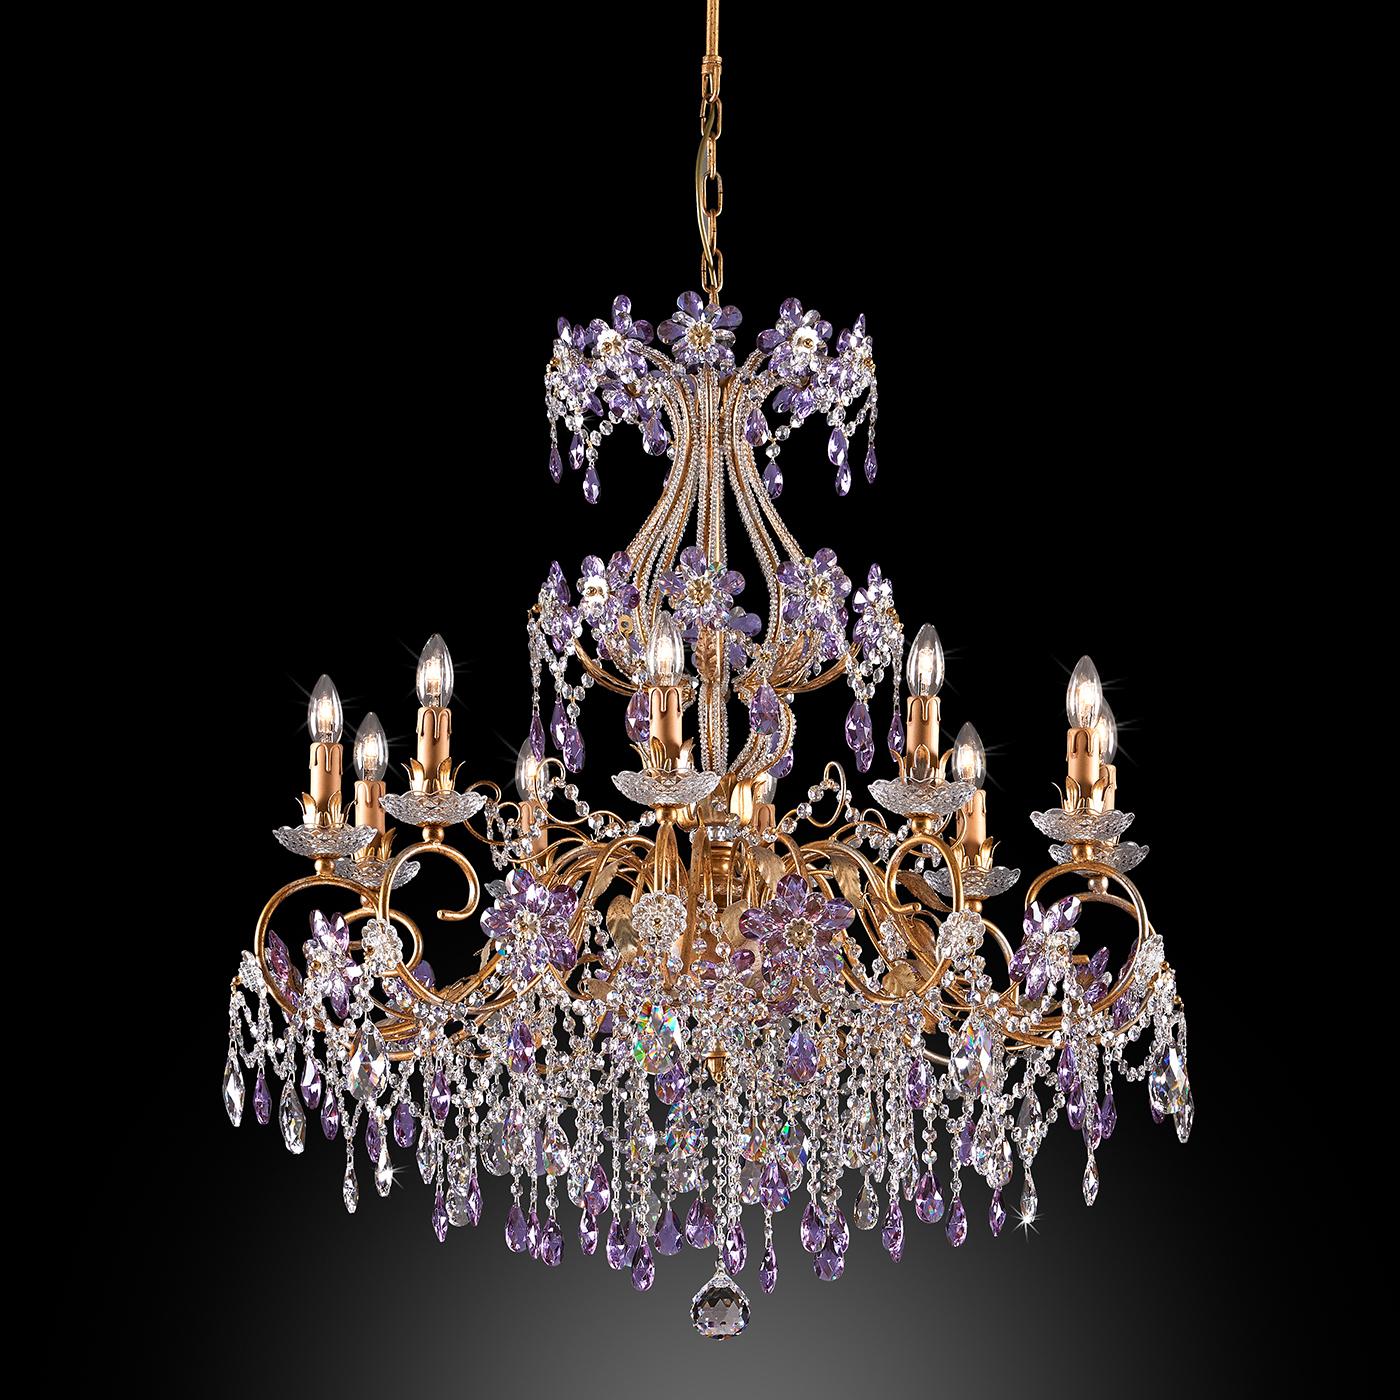 An opulent and unique 10-lights chandelier with meal structure, characterized by antiqued-gold leaf decorations and Asfour crystal chains. They deliver a beautiful visual effect thanks to the mix of transparent and Lilla colors. This original piece